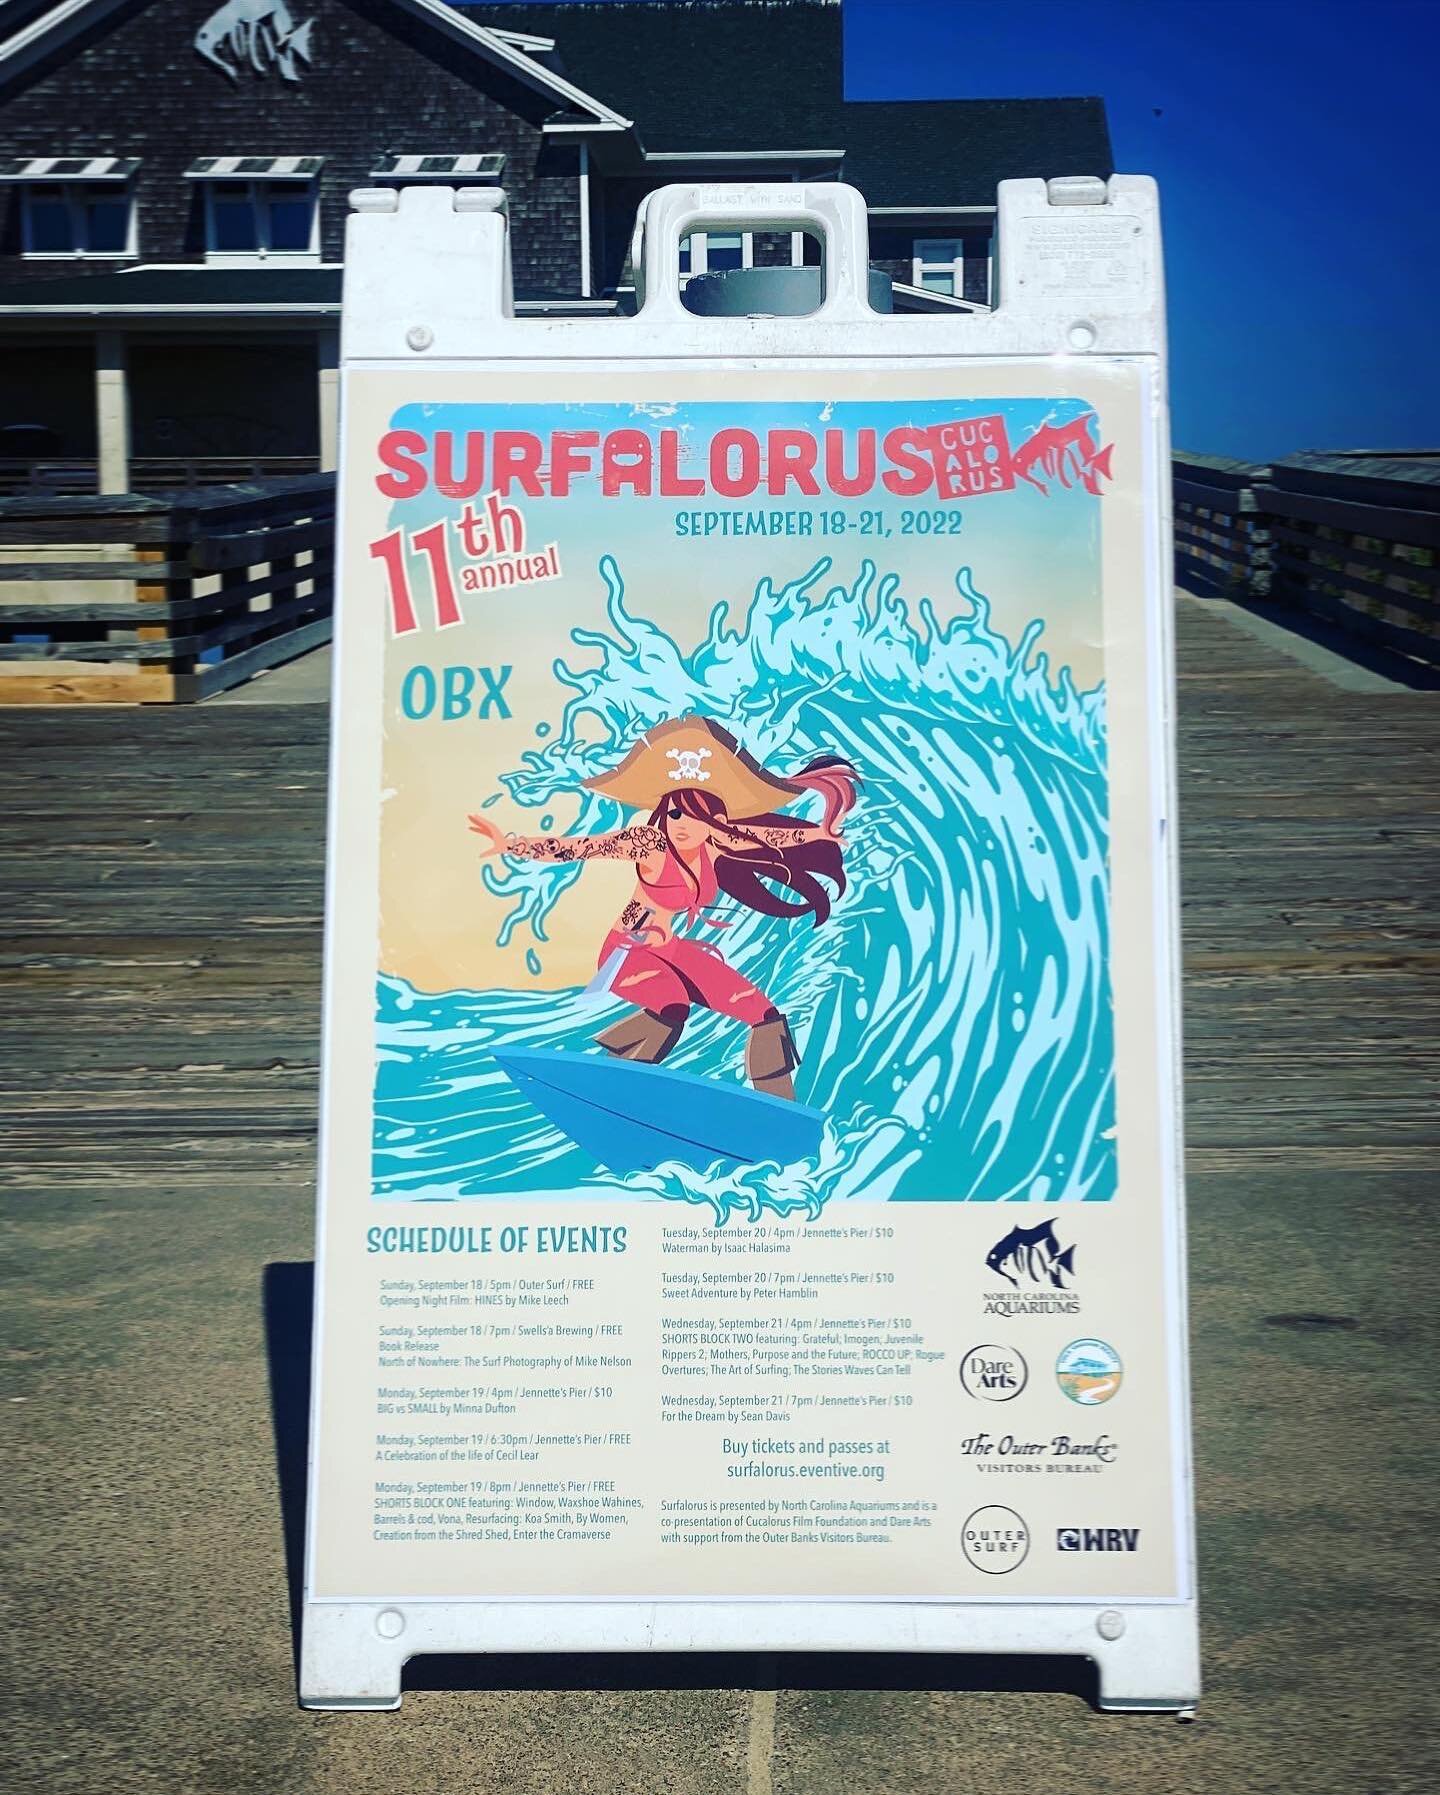 Surfalorous - Day 2 : Screening day on Jannette&rsquo;s Pier for @surfalorus film festival. Awesome time (and some little emotional moments) showing the flick and talking Duke. The Spirit of Aloha &amp; Southern Hospitality seem to go together seamle